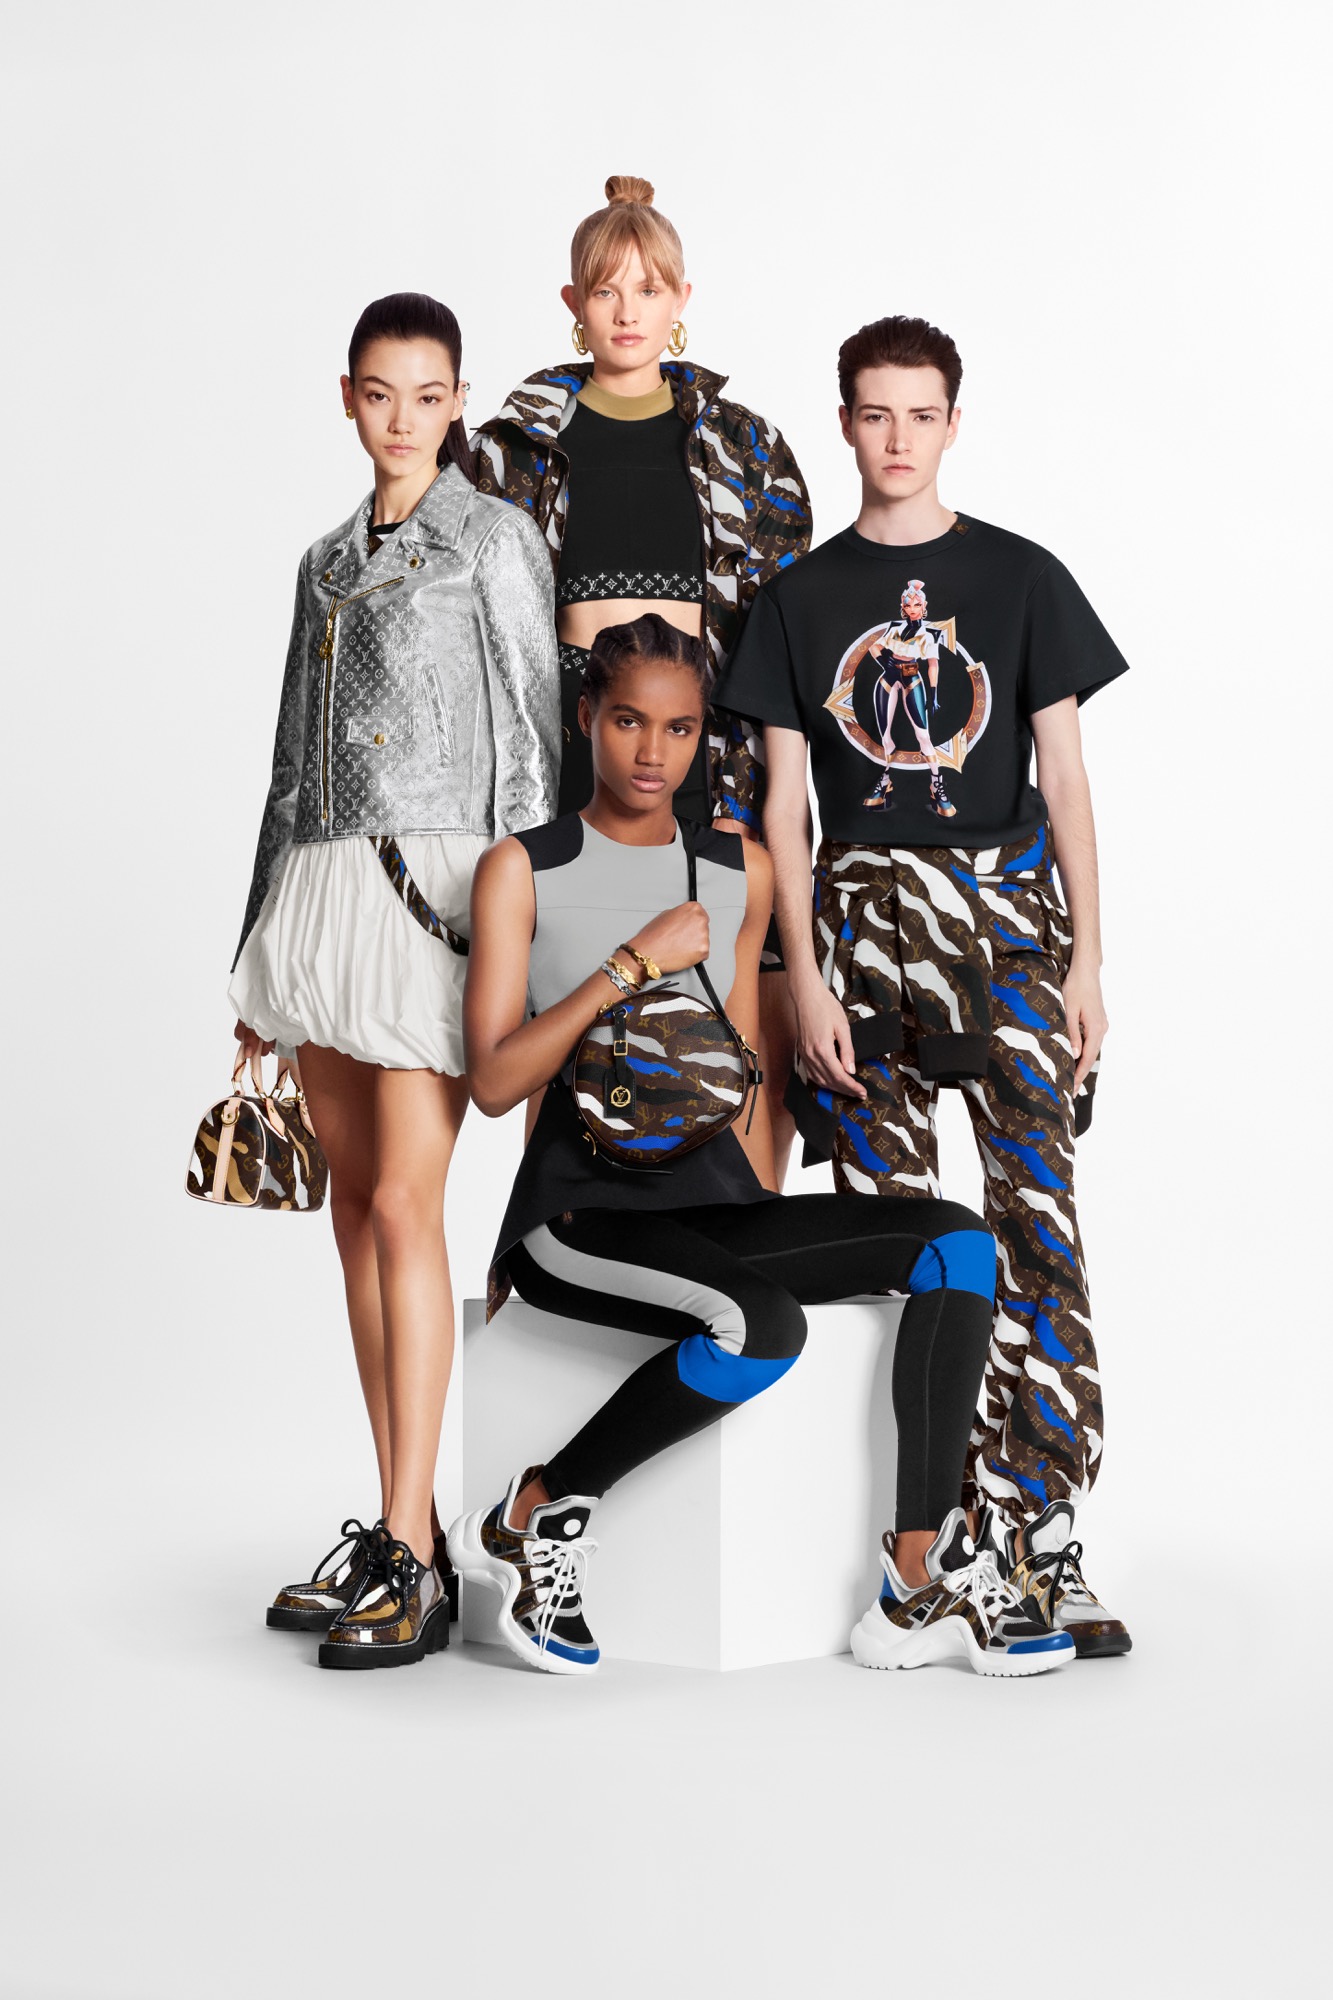 The Vuitton X League of Legends Collection Here - V Magazine